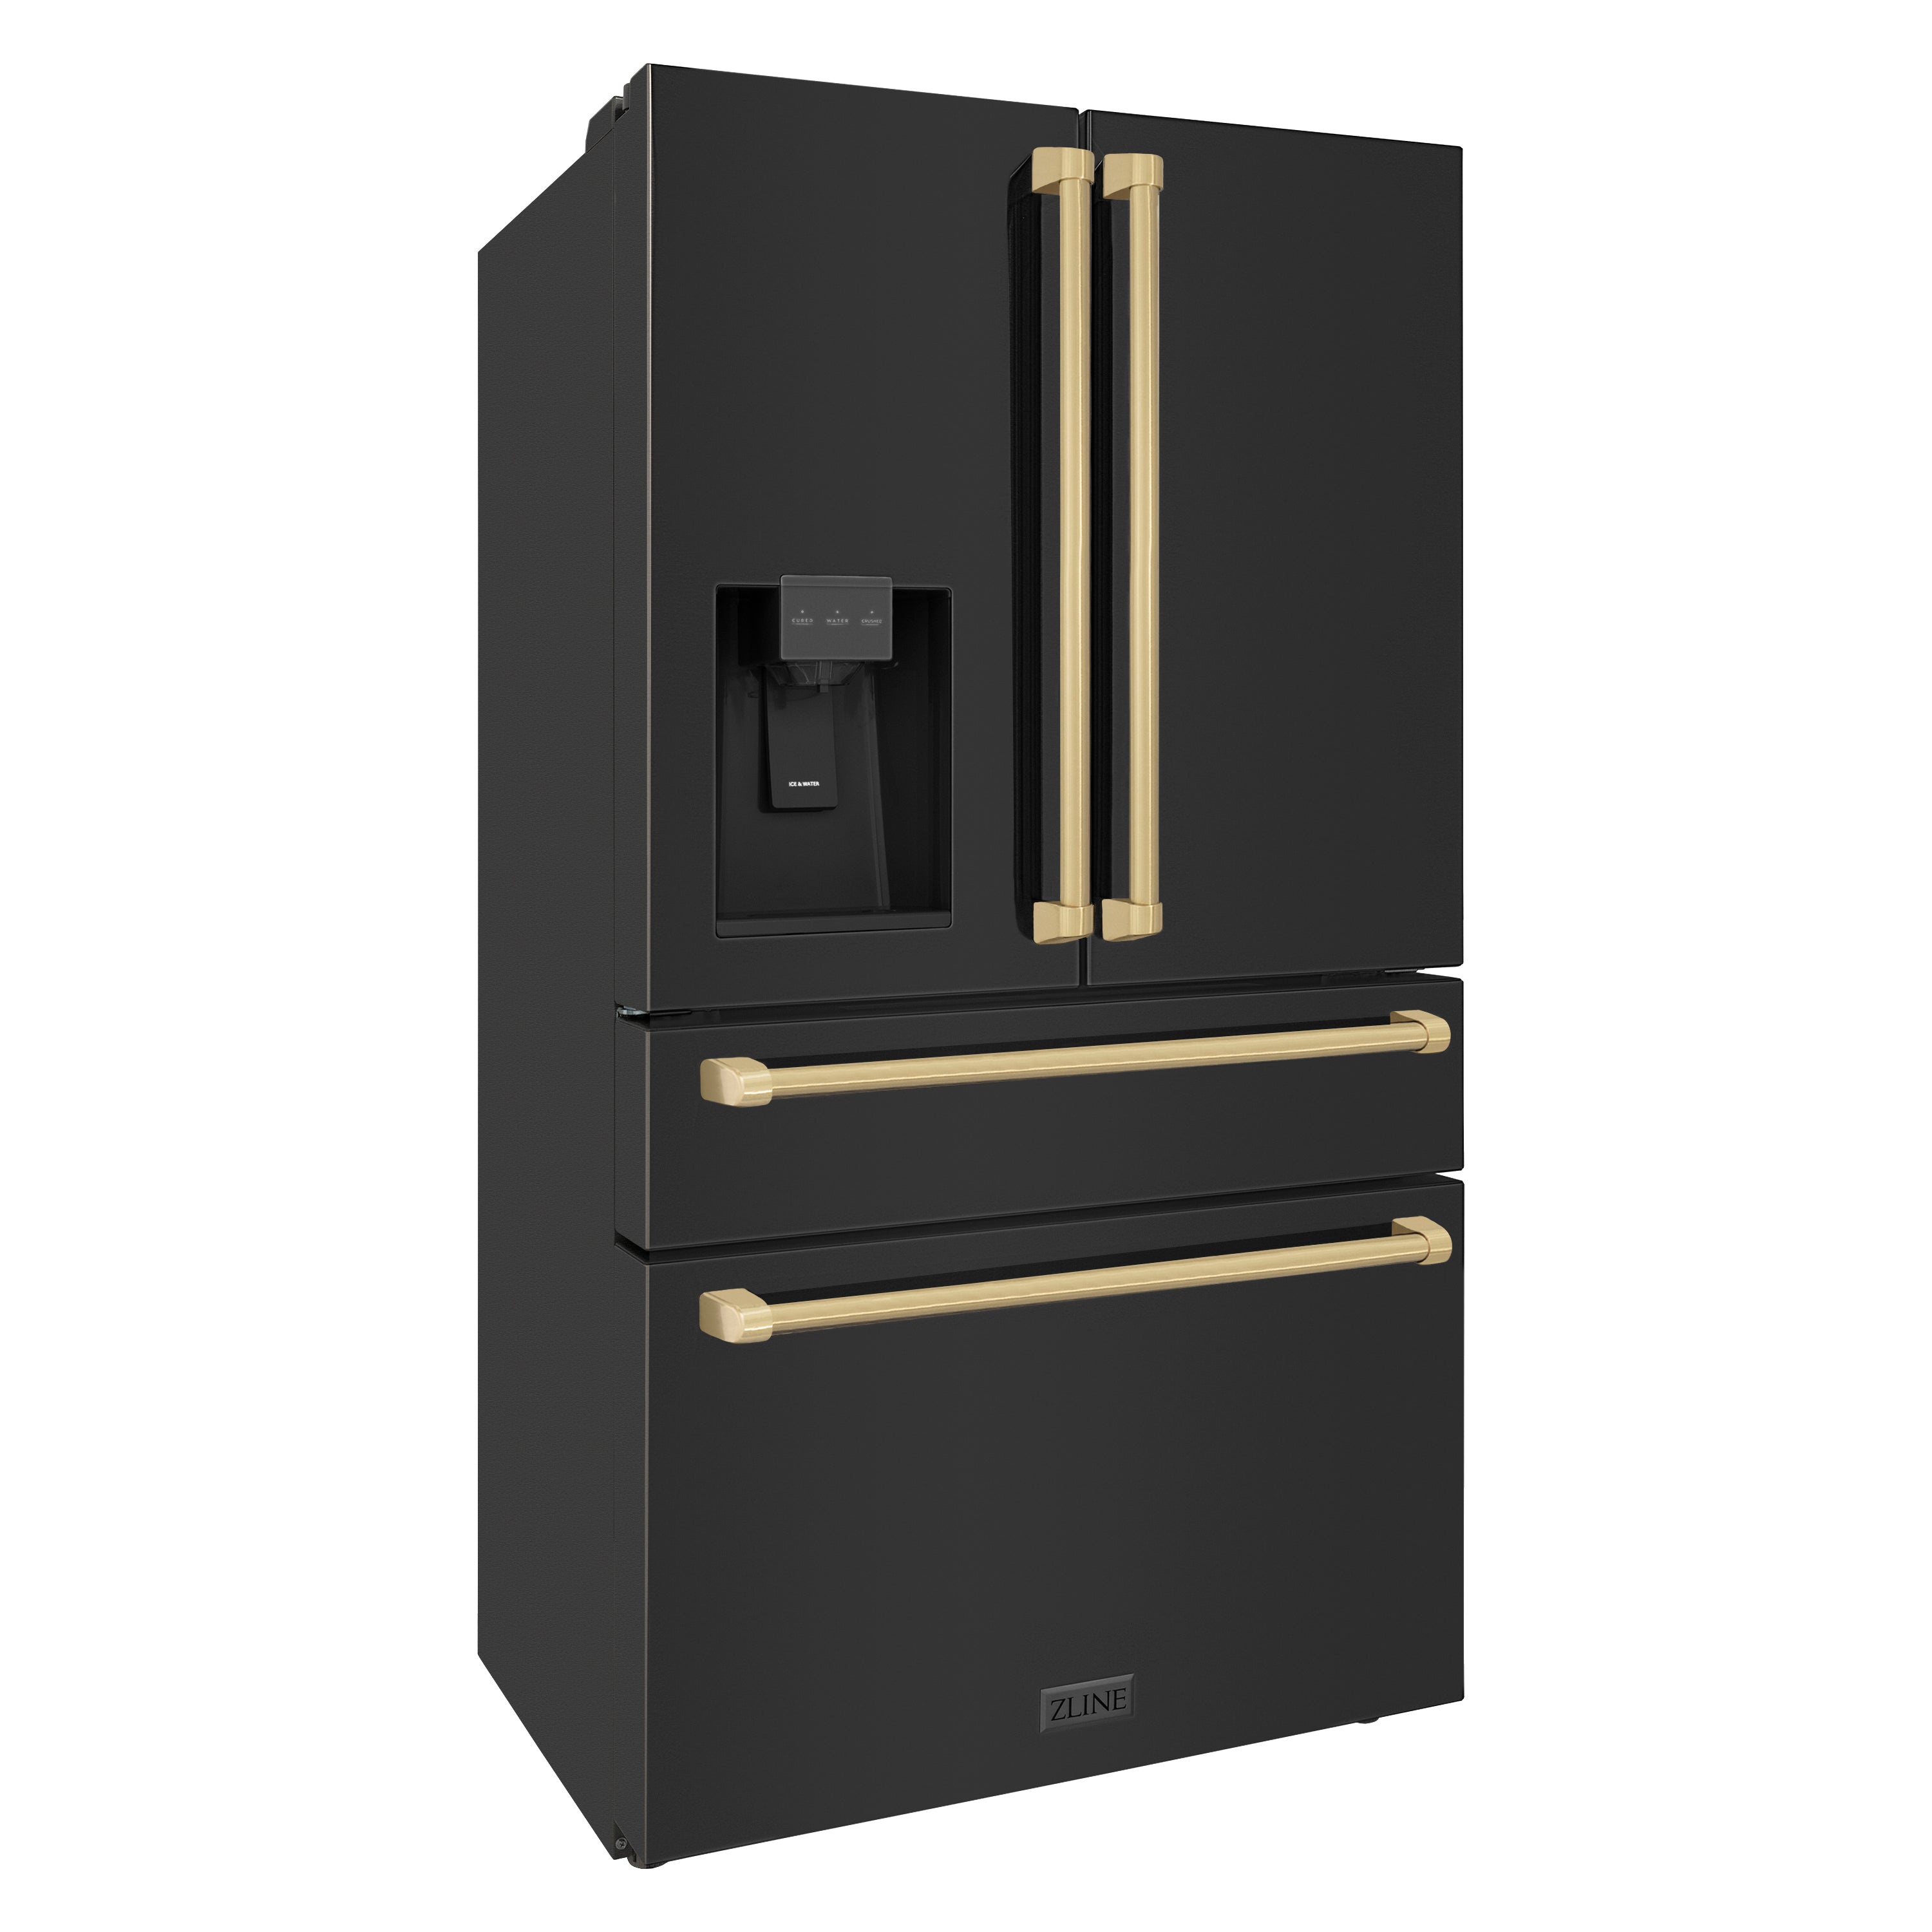 ZLINE 36" Autograph Edition 21.6 cu. ft 4-Door French Door Refrigerator with Water and Ice Dispenser in Fingerprint Resistant Black Stainless Steel with Champagne Bronze Handles (RFMZ-W-36-BS-CB)